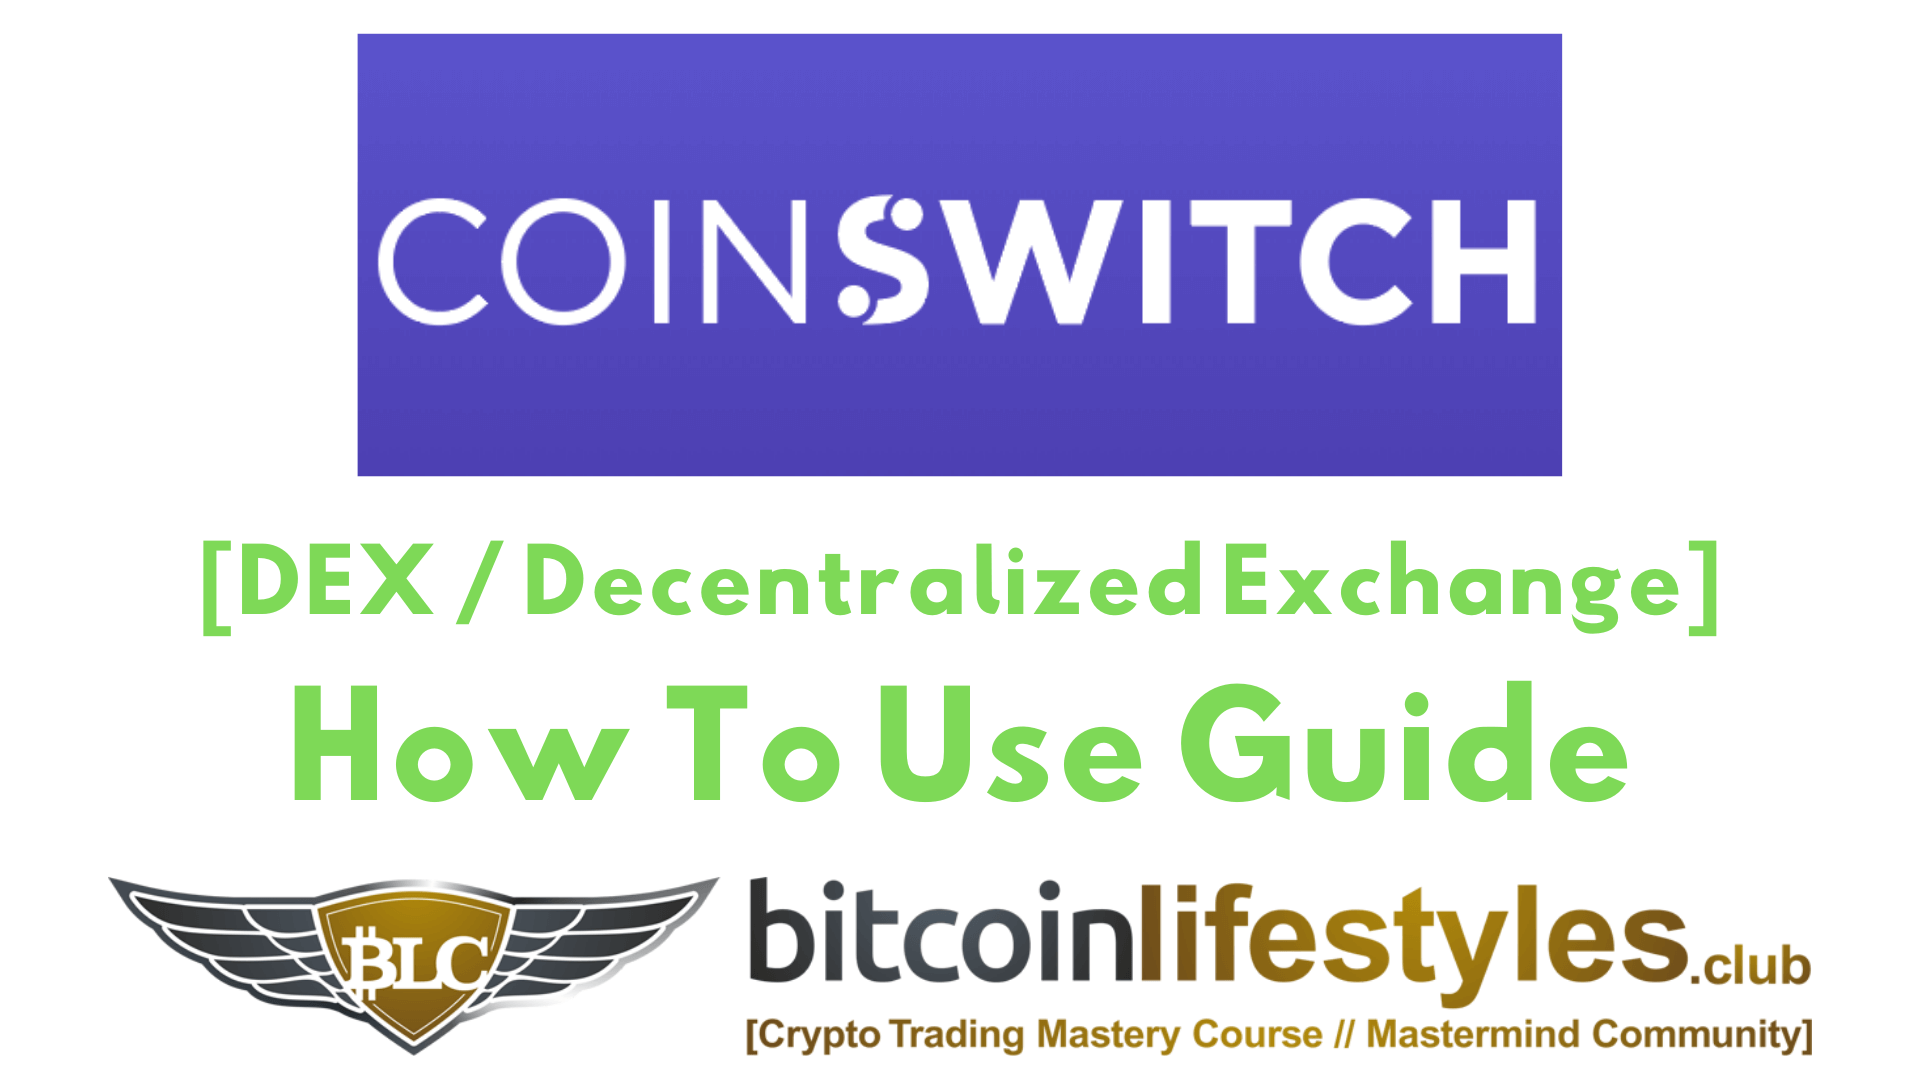 CoinSwitch DEX / Decentralized Cryptocurrency Exchange [HOW TO USE GUIDE]